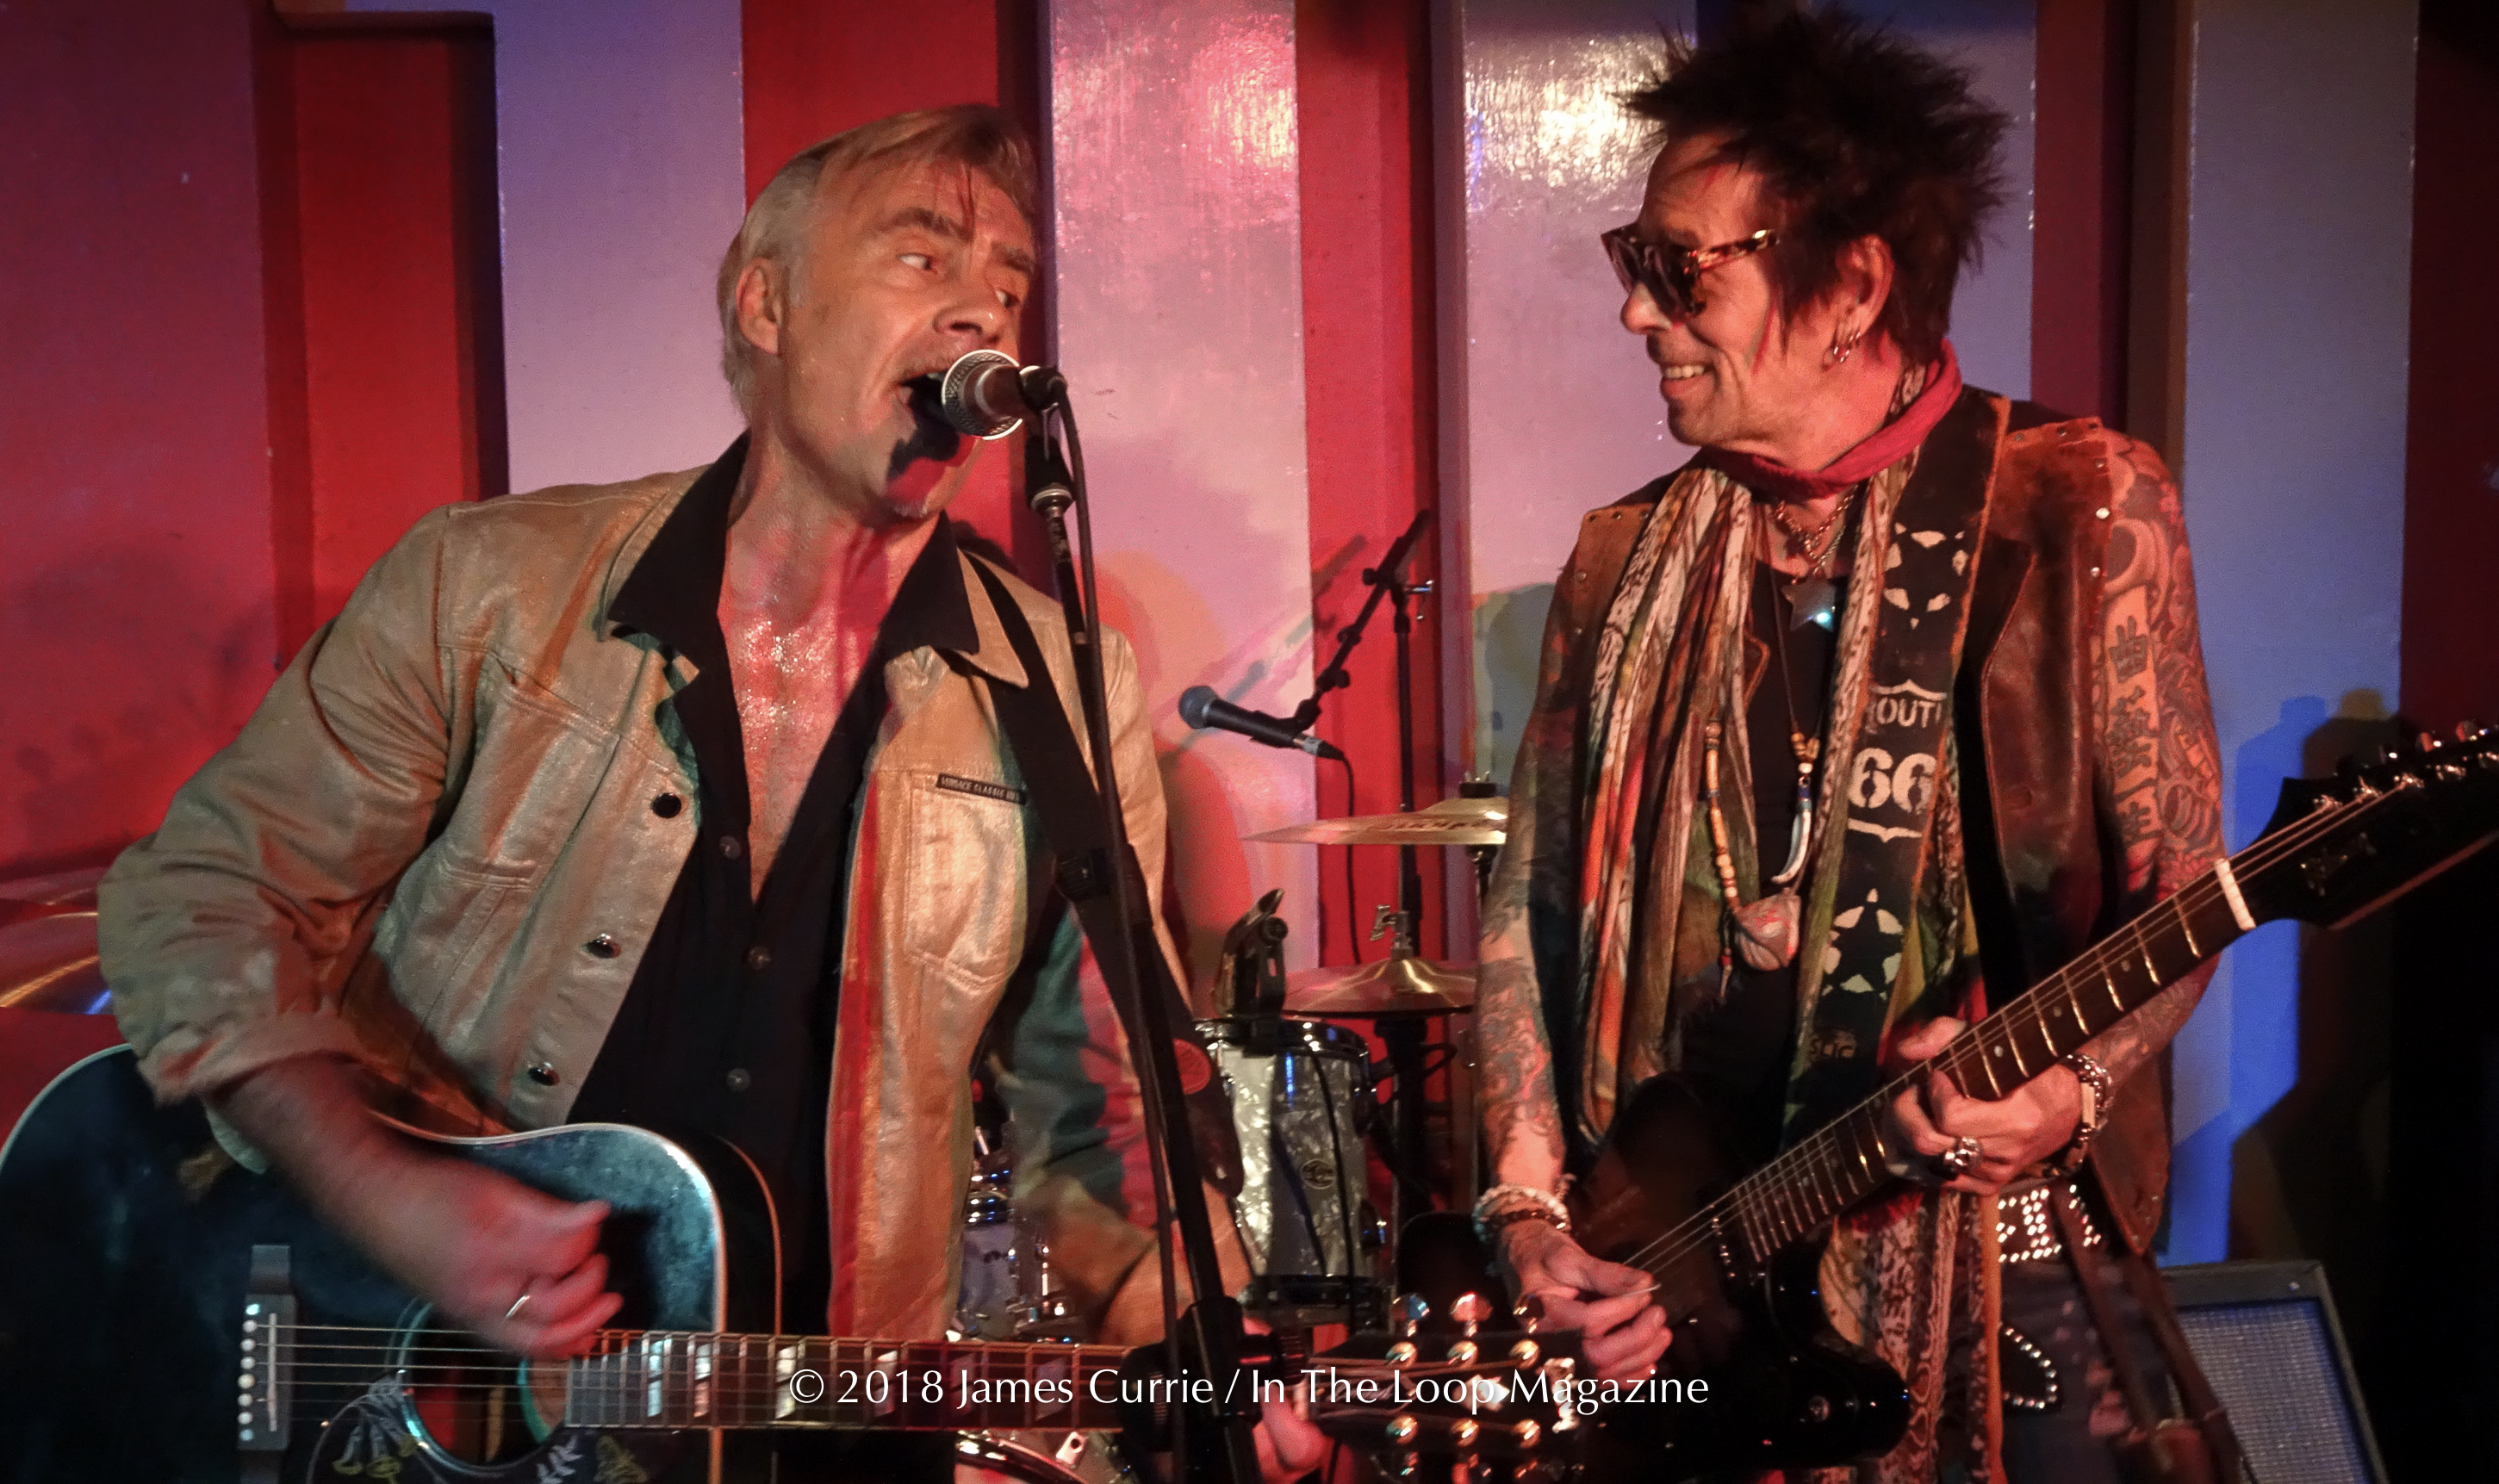 ITLM OTRS Presents: Se-X Pistol, Glen Matlock, Plays London Soho Club With Reworked Classics In A Super Group That Includes U.S. Guitar Legend Earl Slick